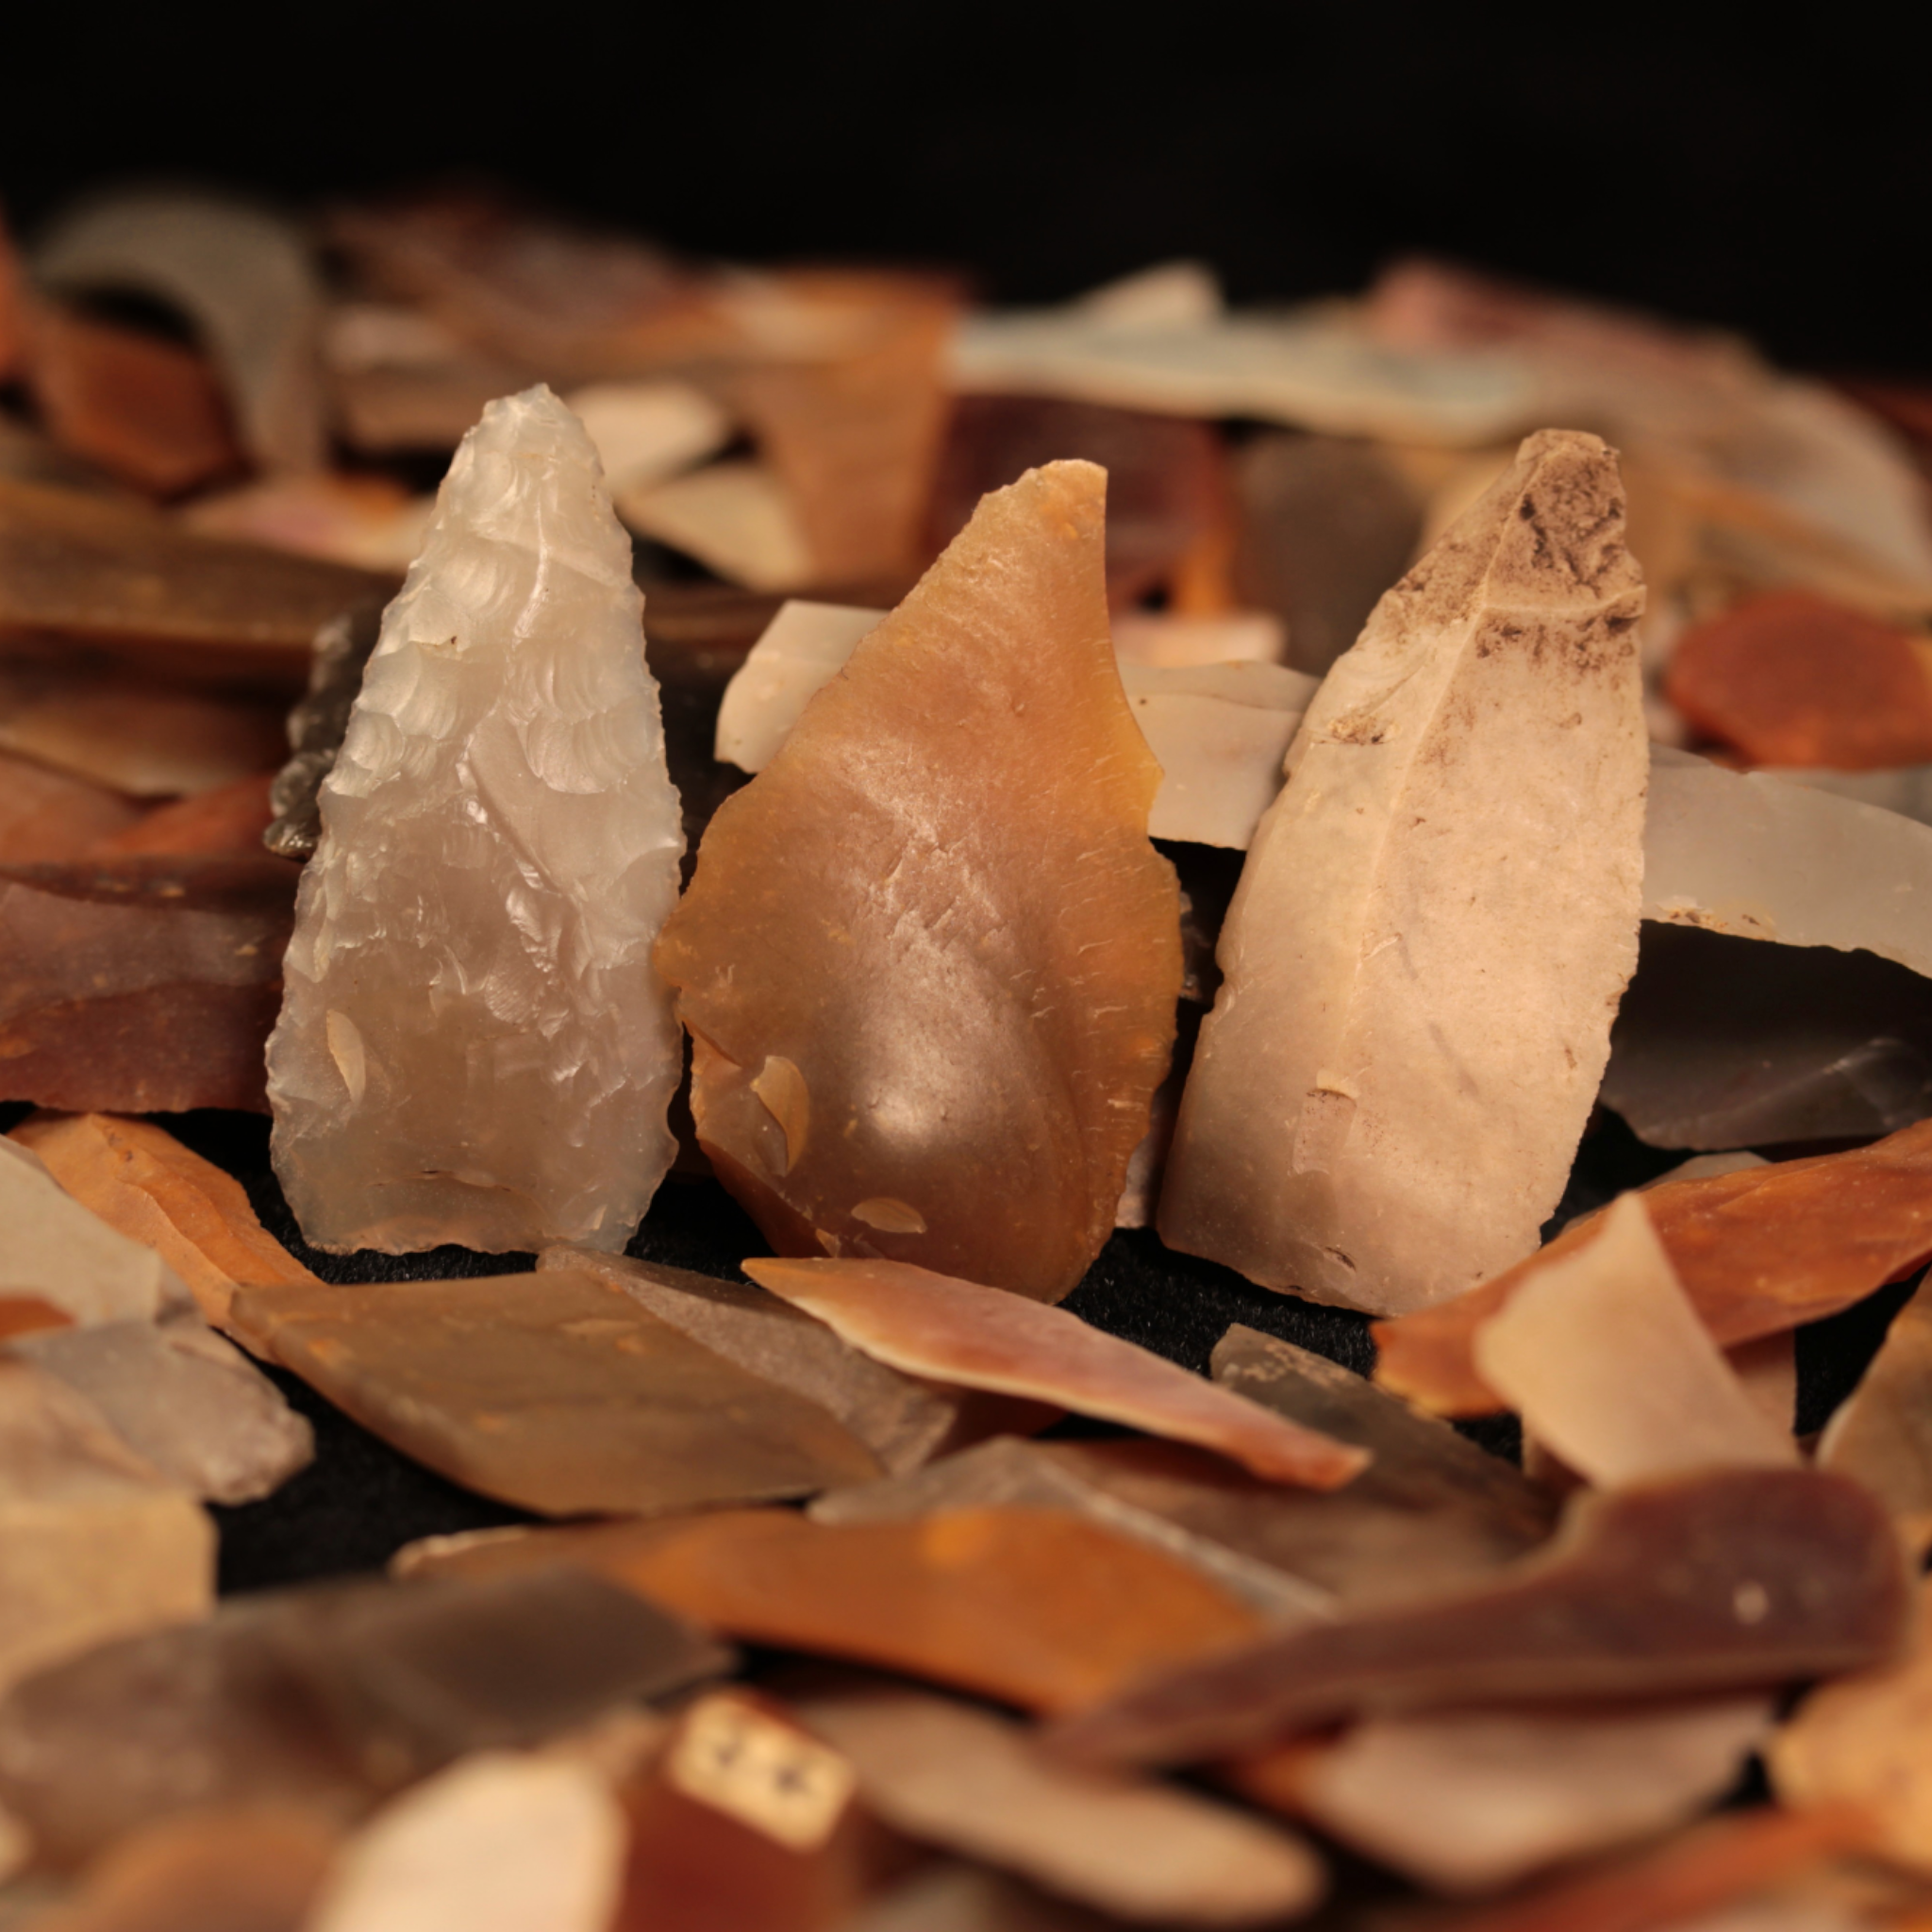 mesolithic age stone tools